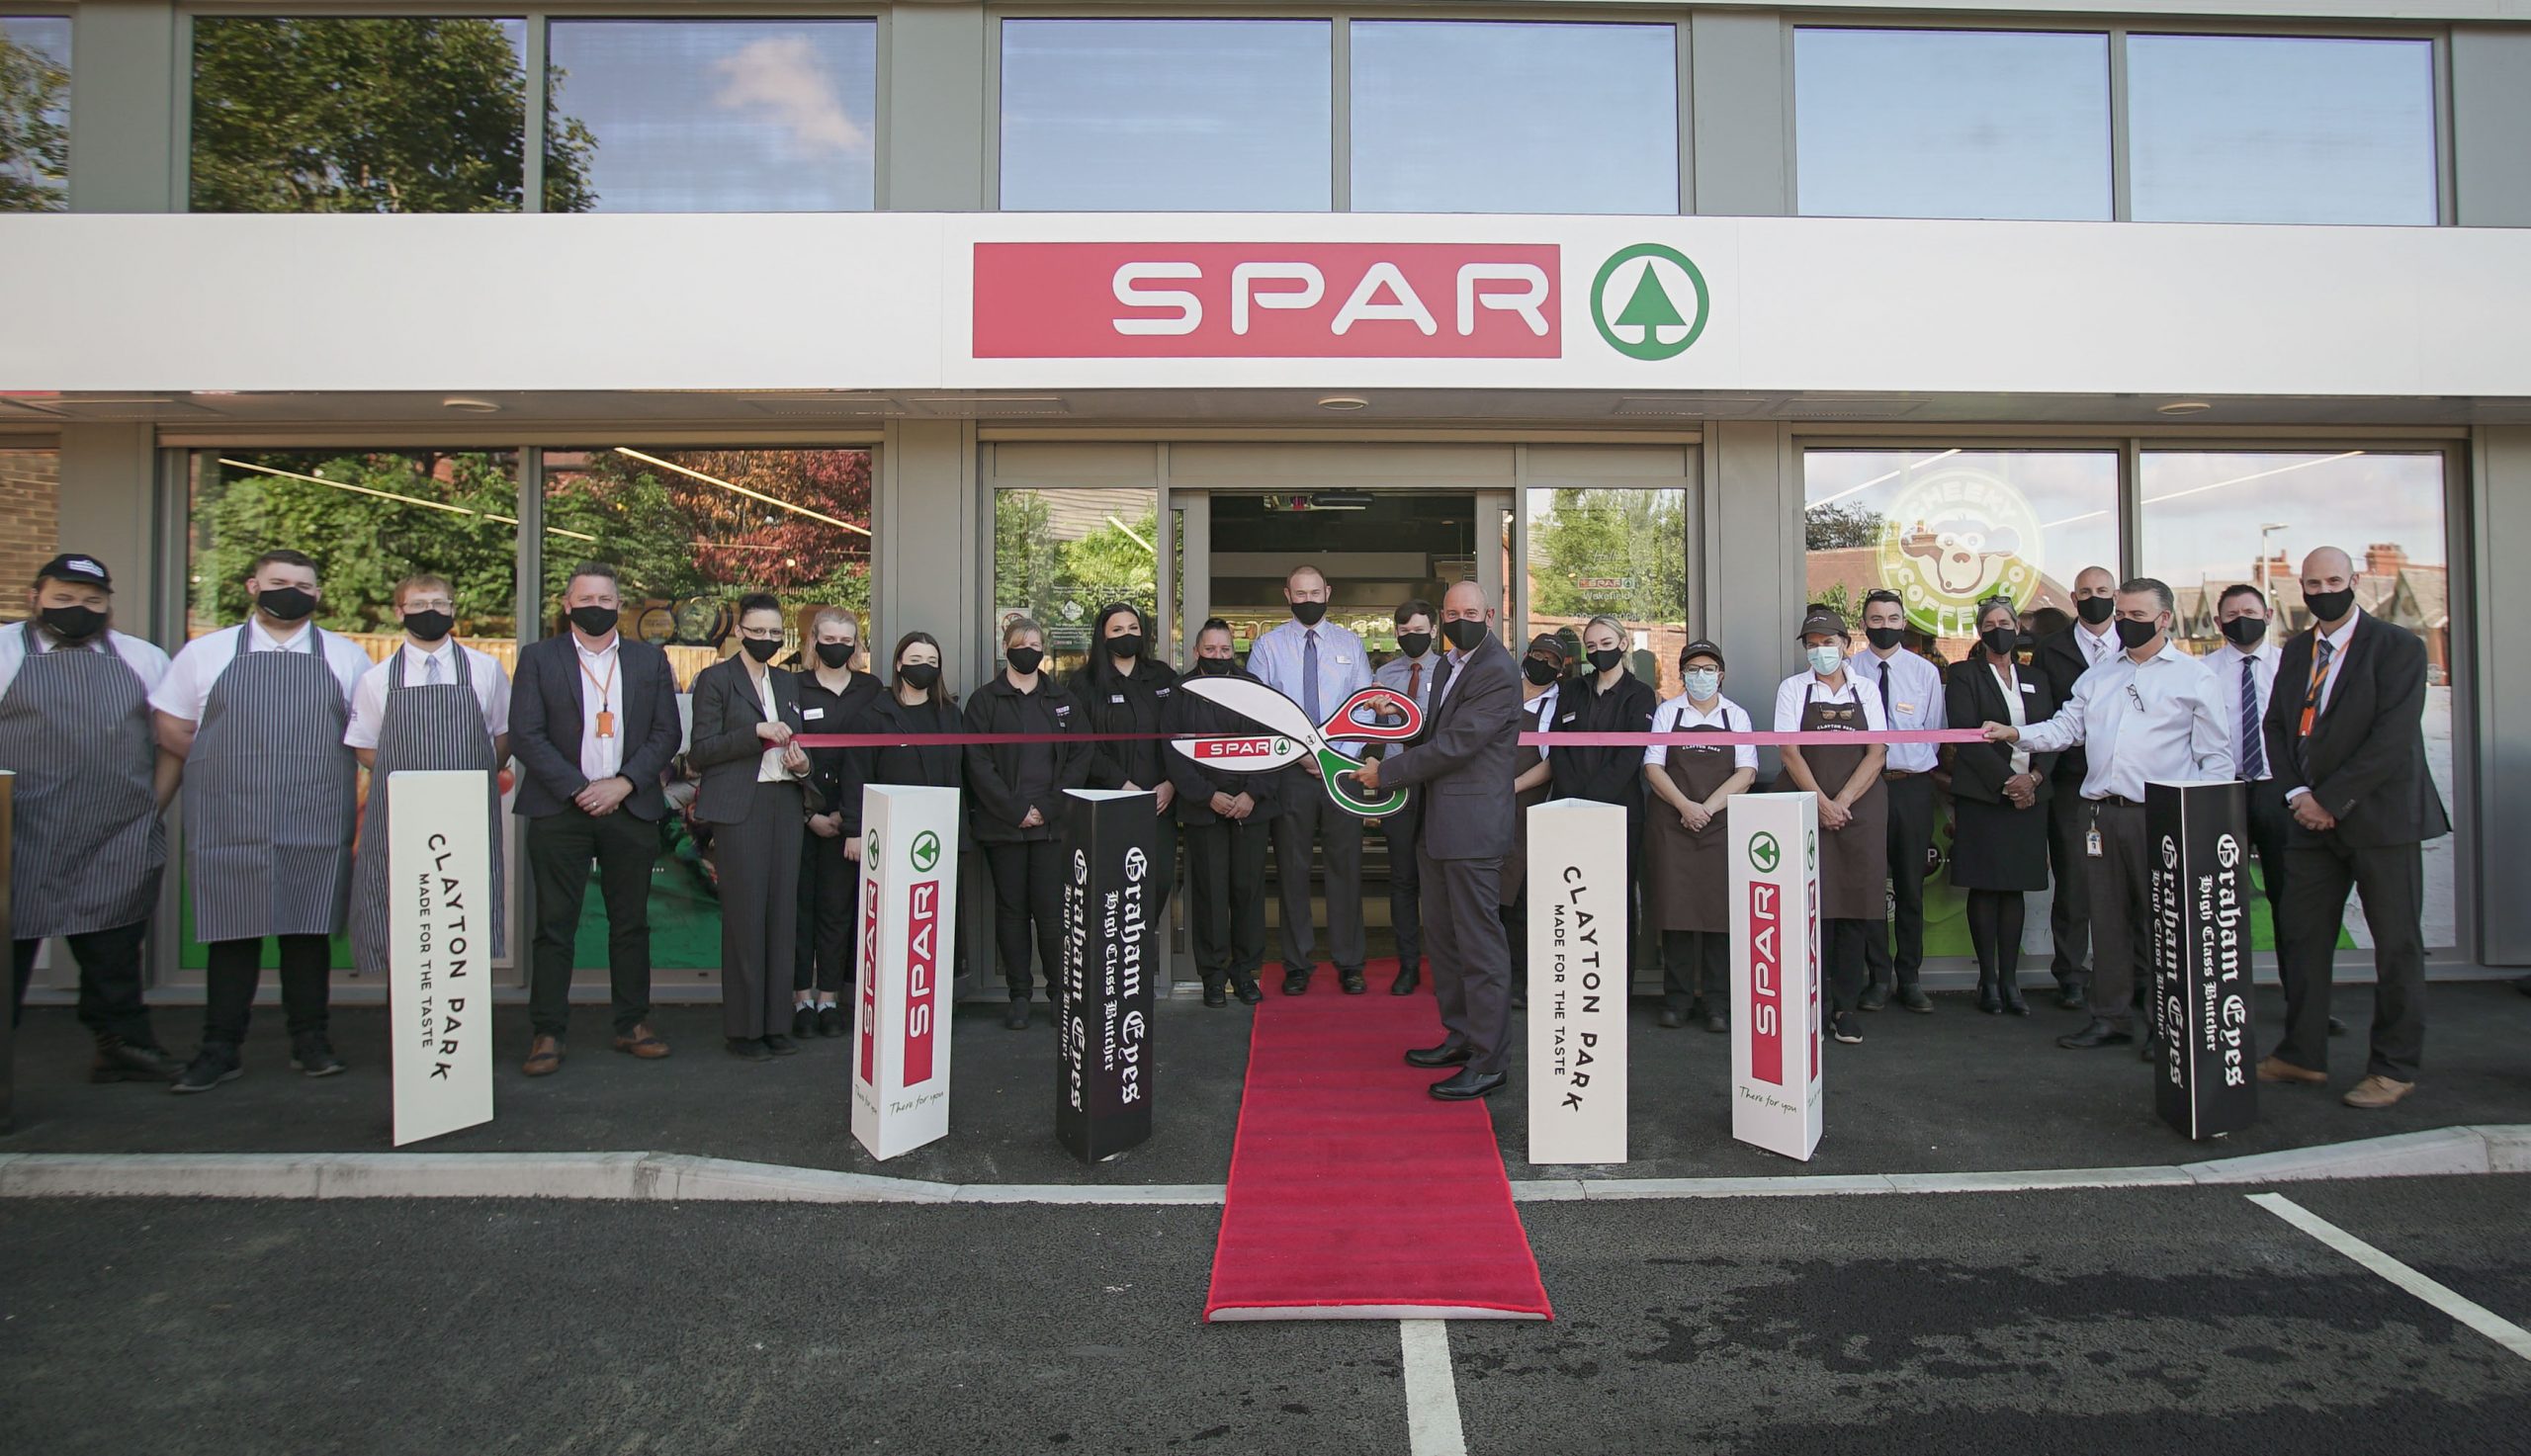 James Hall opens 150th SPAR store, in Wakefield